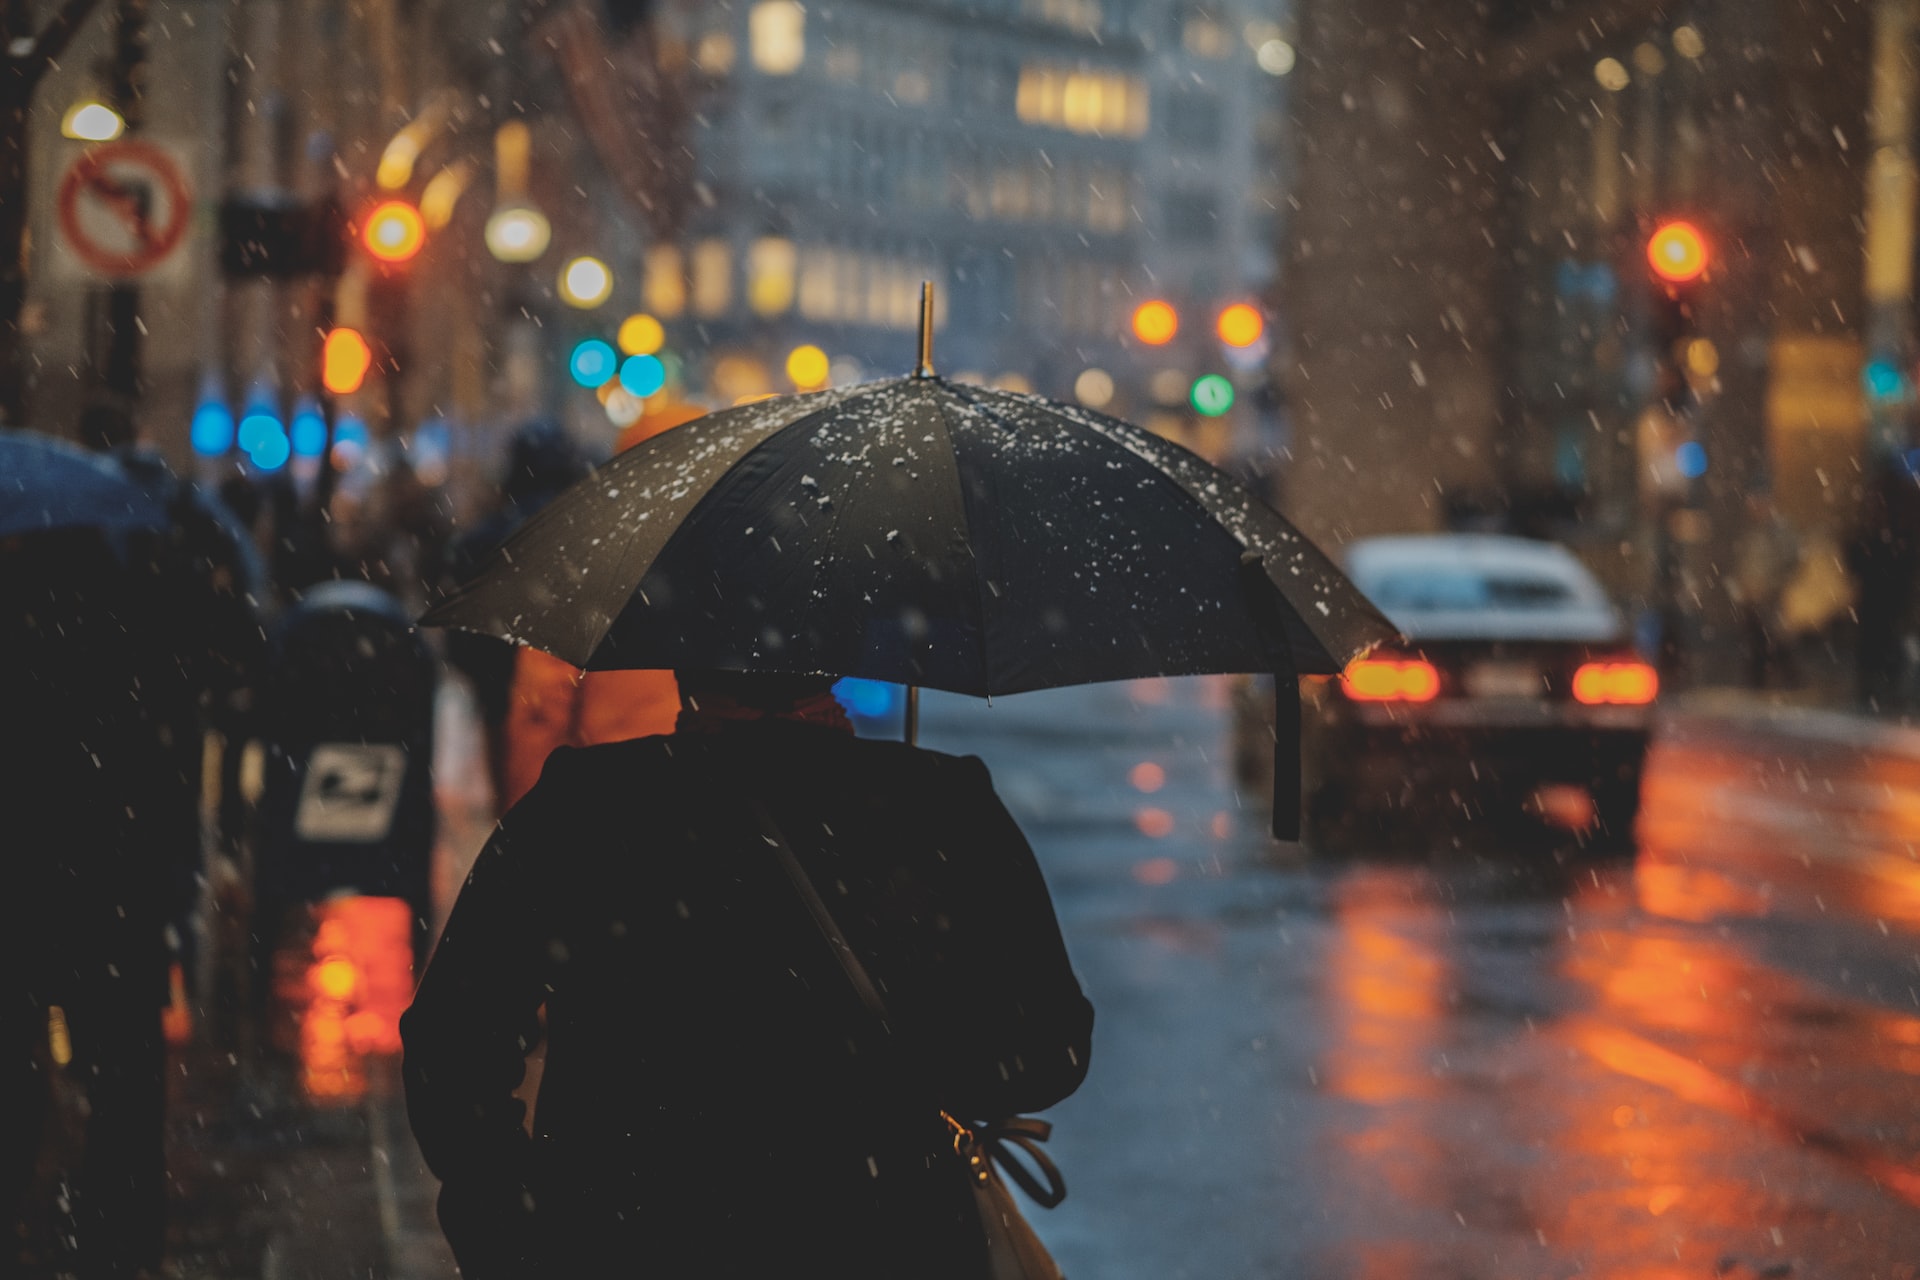 A city scene showing a person walking in the rain